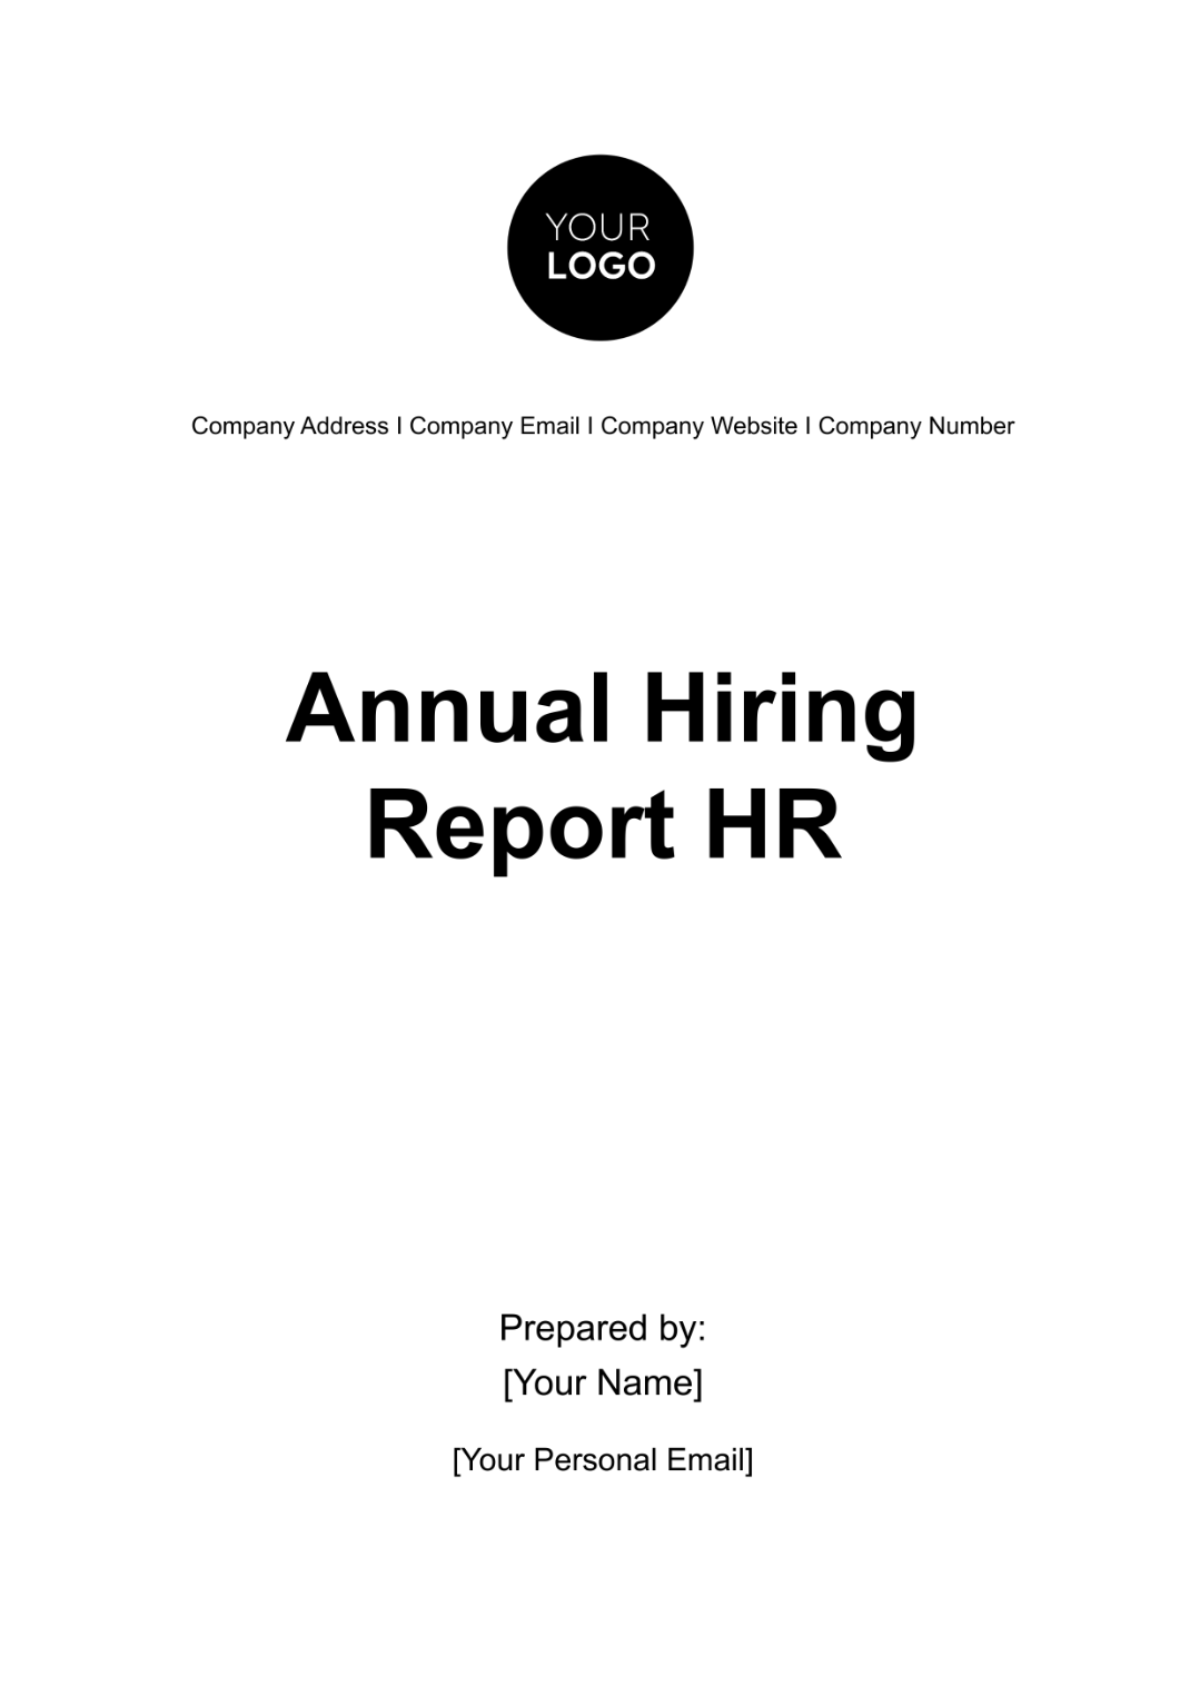 Free Annual Hiring Report HR Template